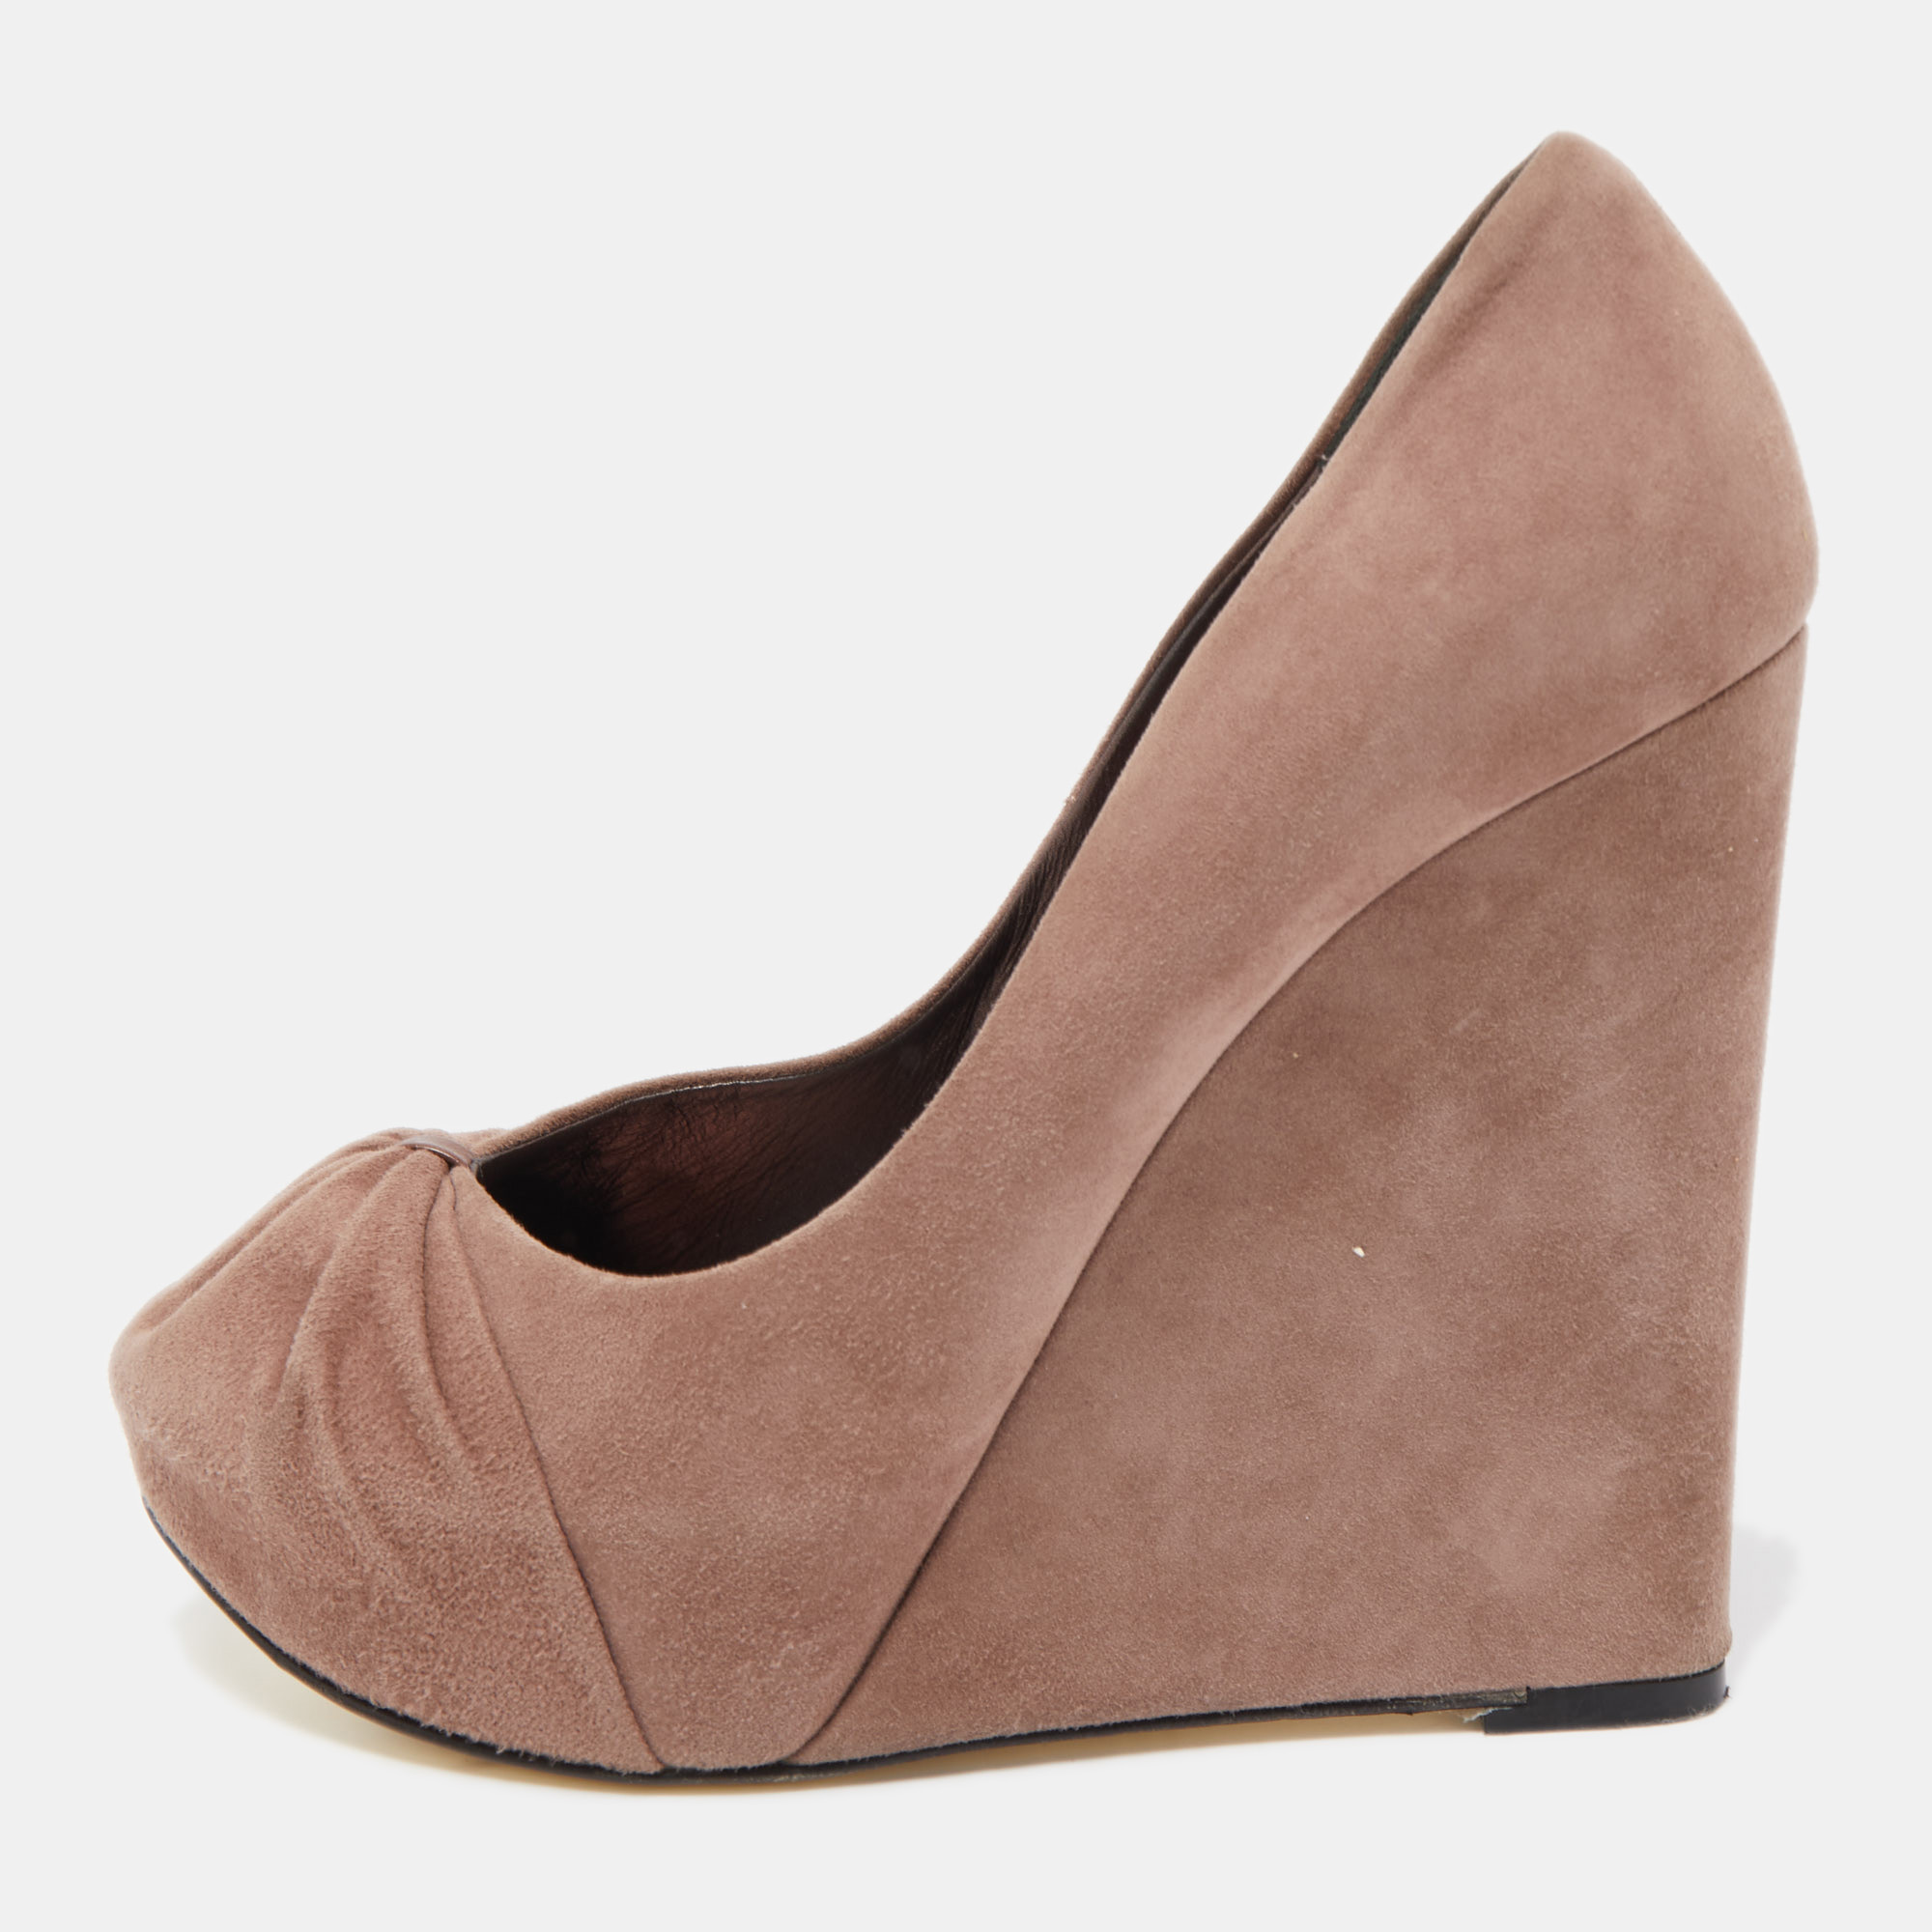 Gina dusty pink pleated suede wedge pumps size 38